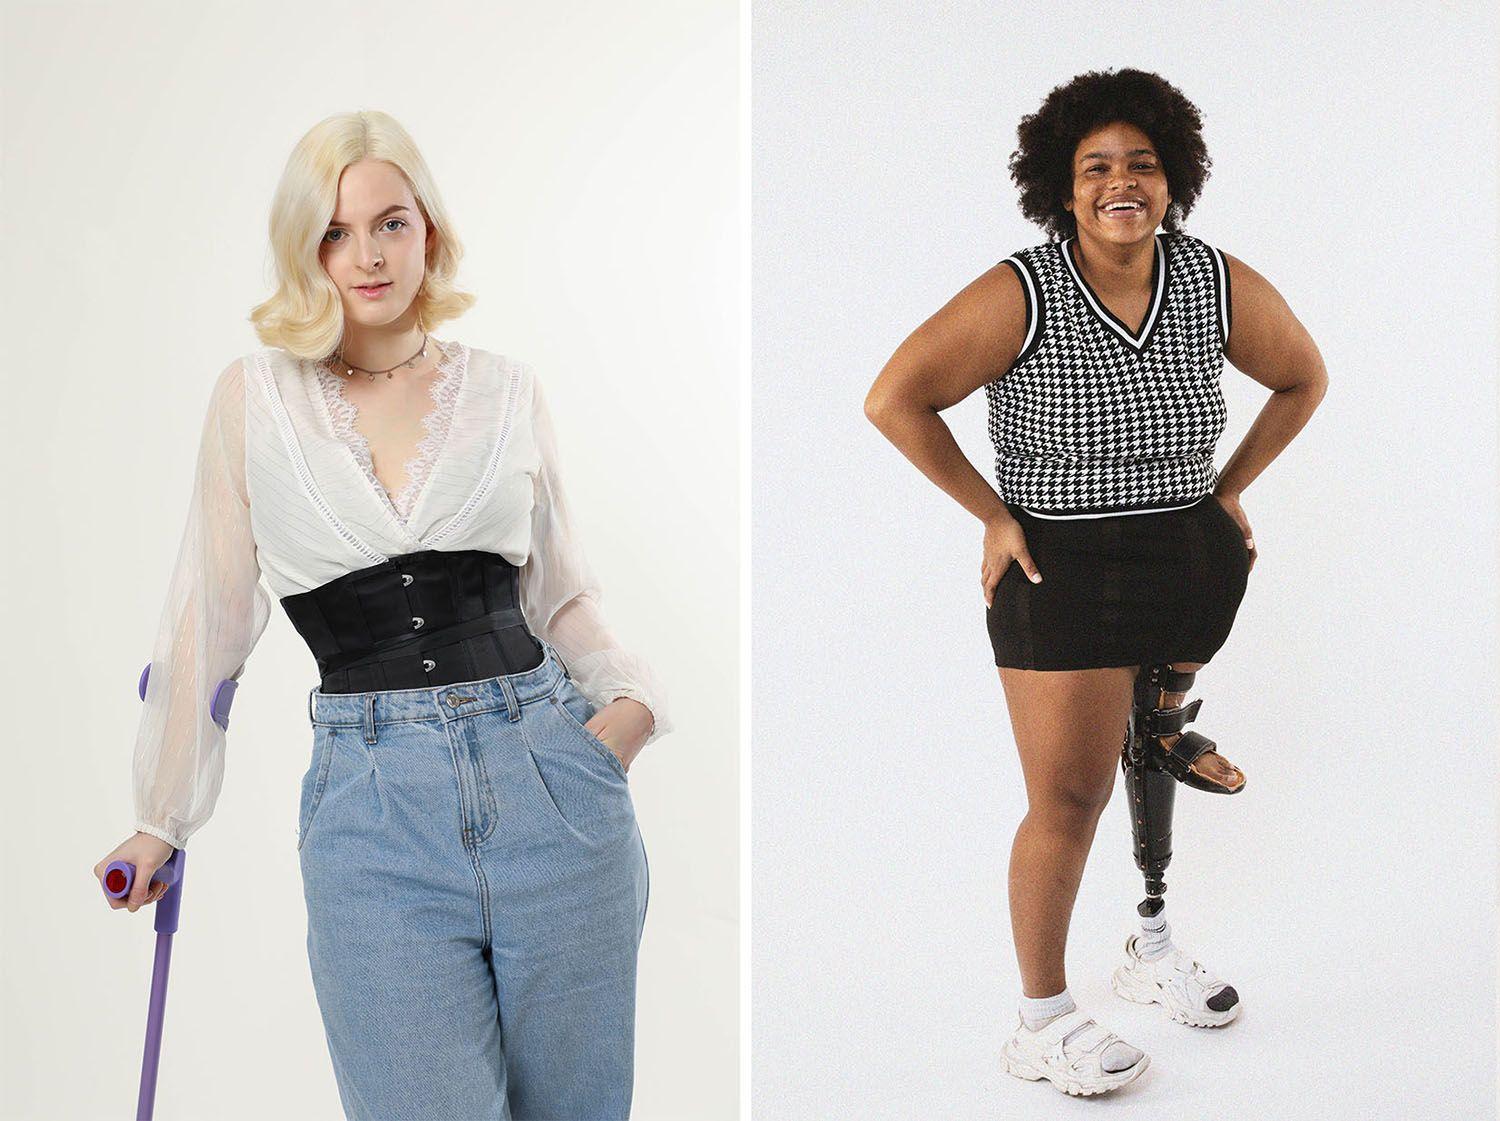 How Some Brands are Improving Disability Representation and Visibility